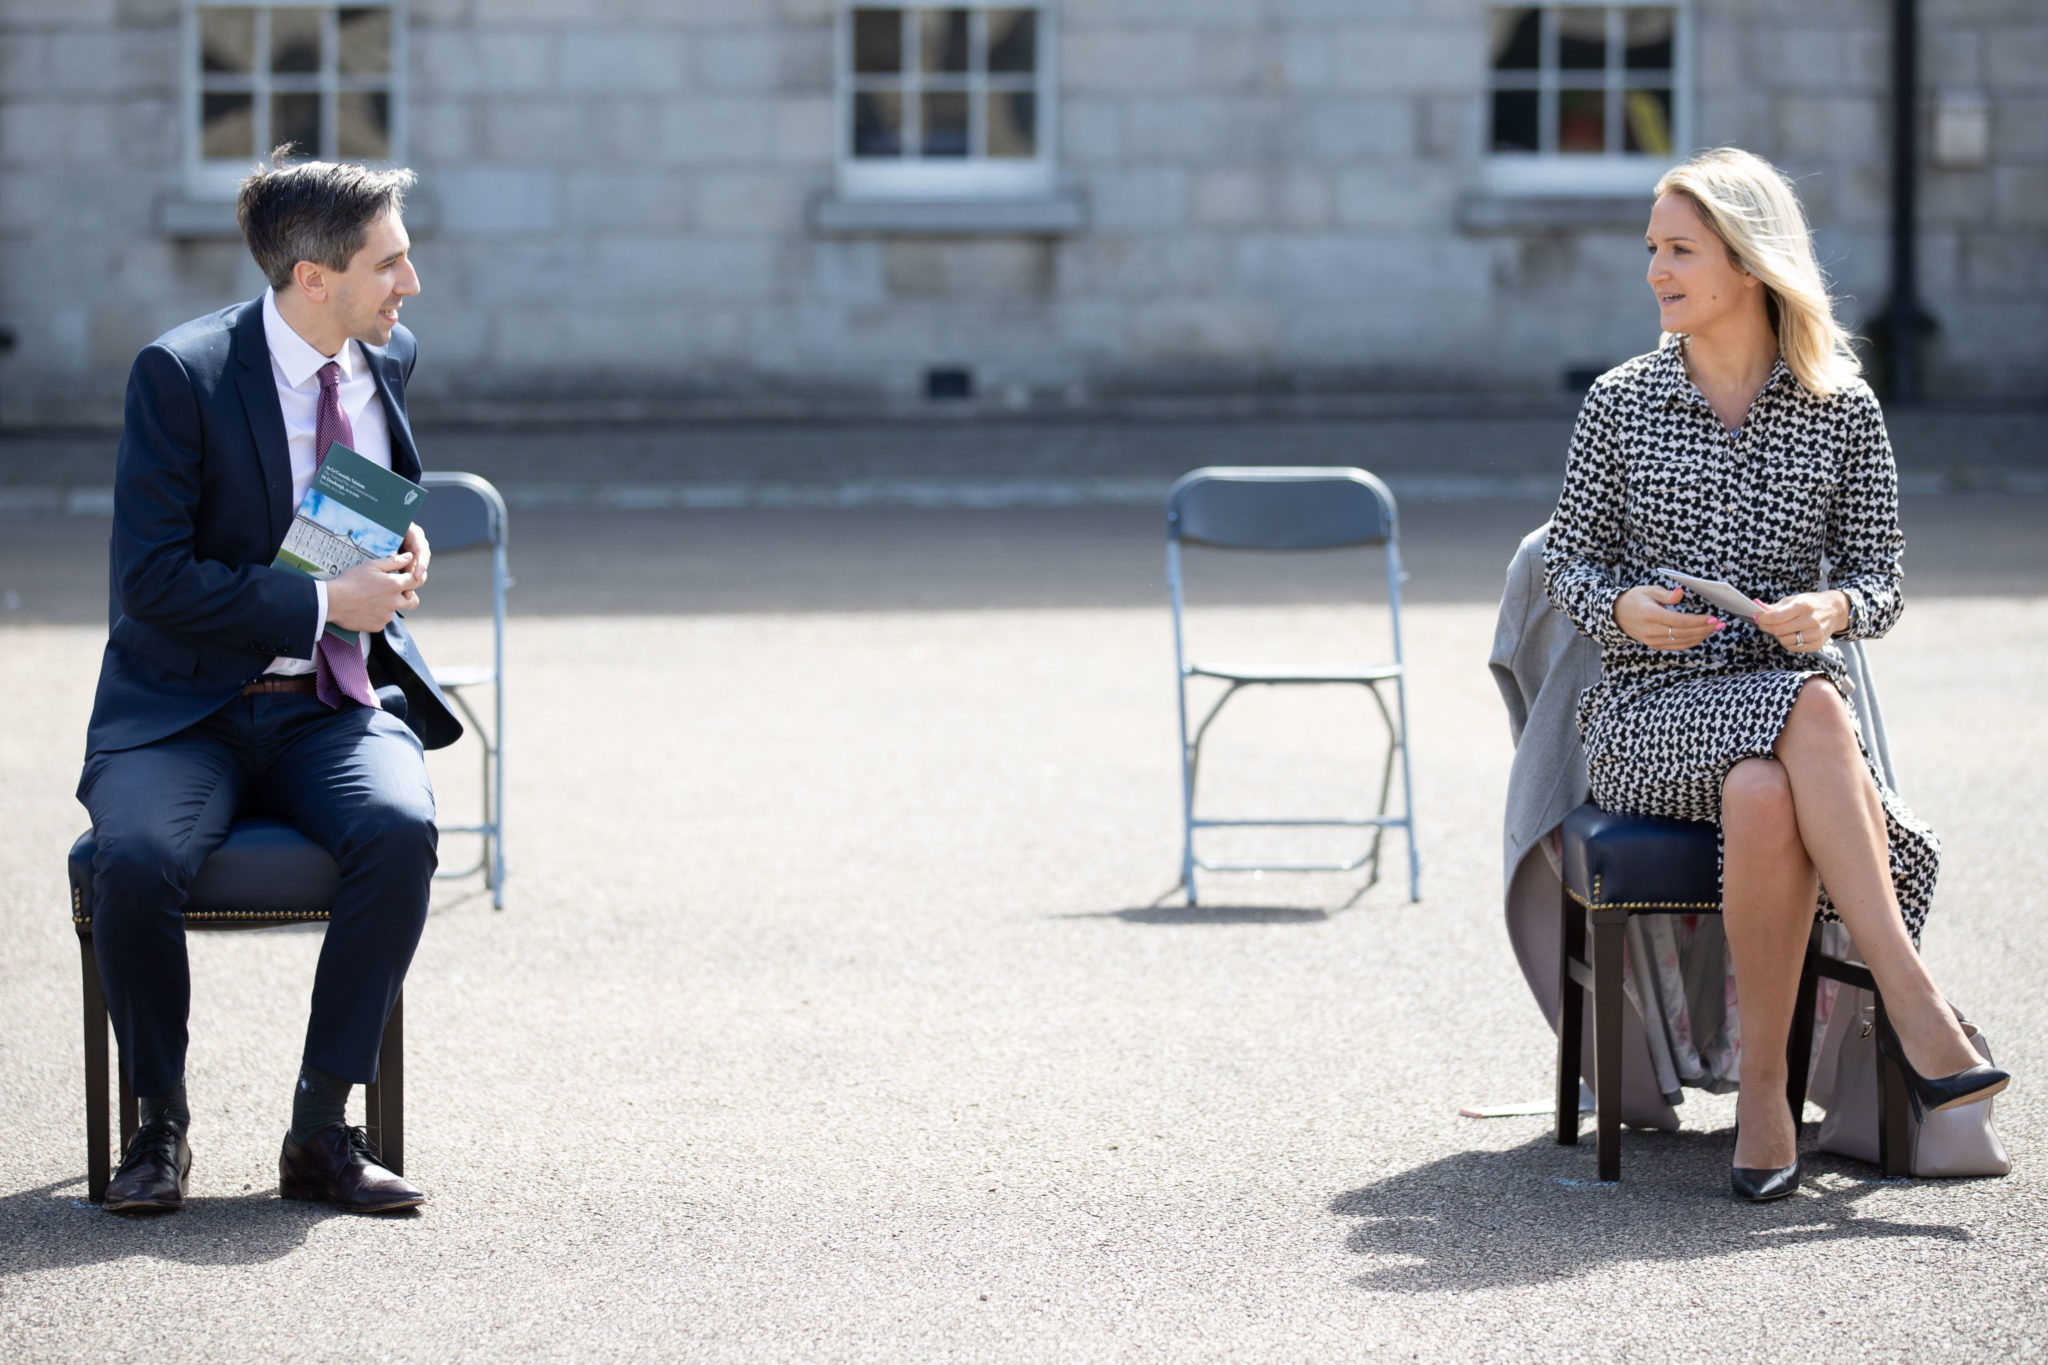 Minister for Further and Higher Education Simon Harris and Justice Minister Helen McEntee at Collins Barracks, 12-07-2020. Image: Julien Behal